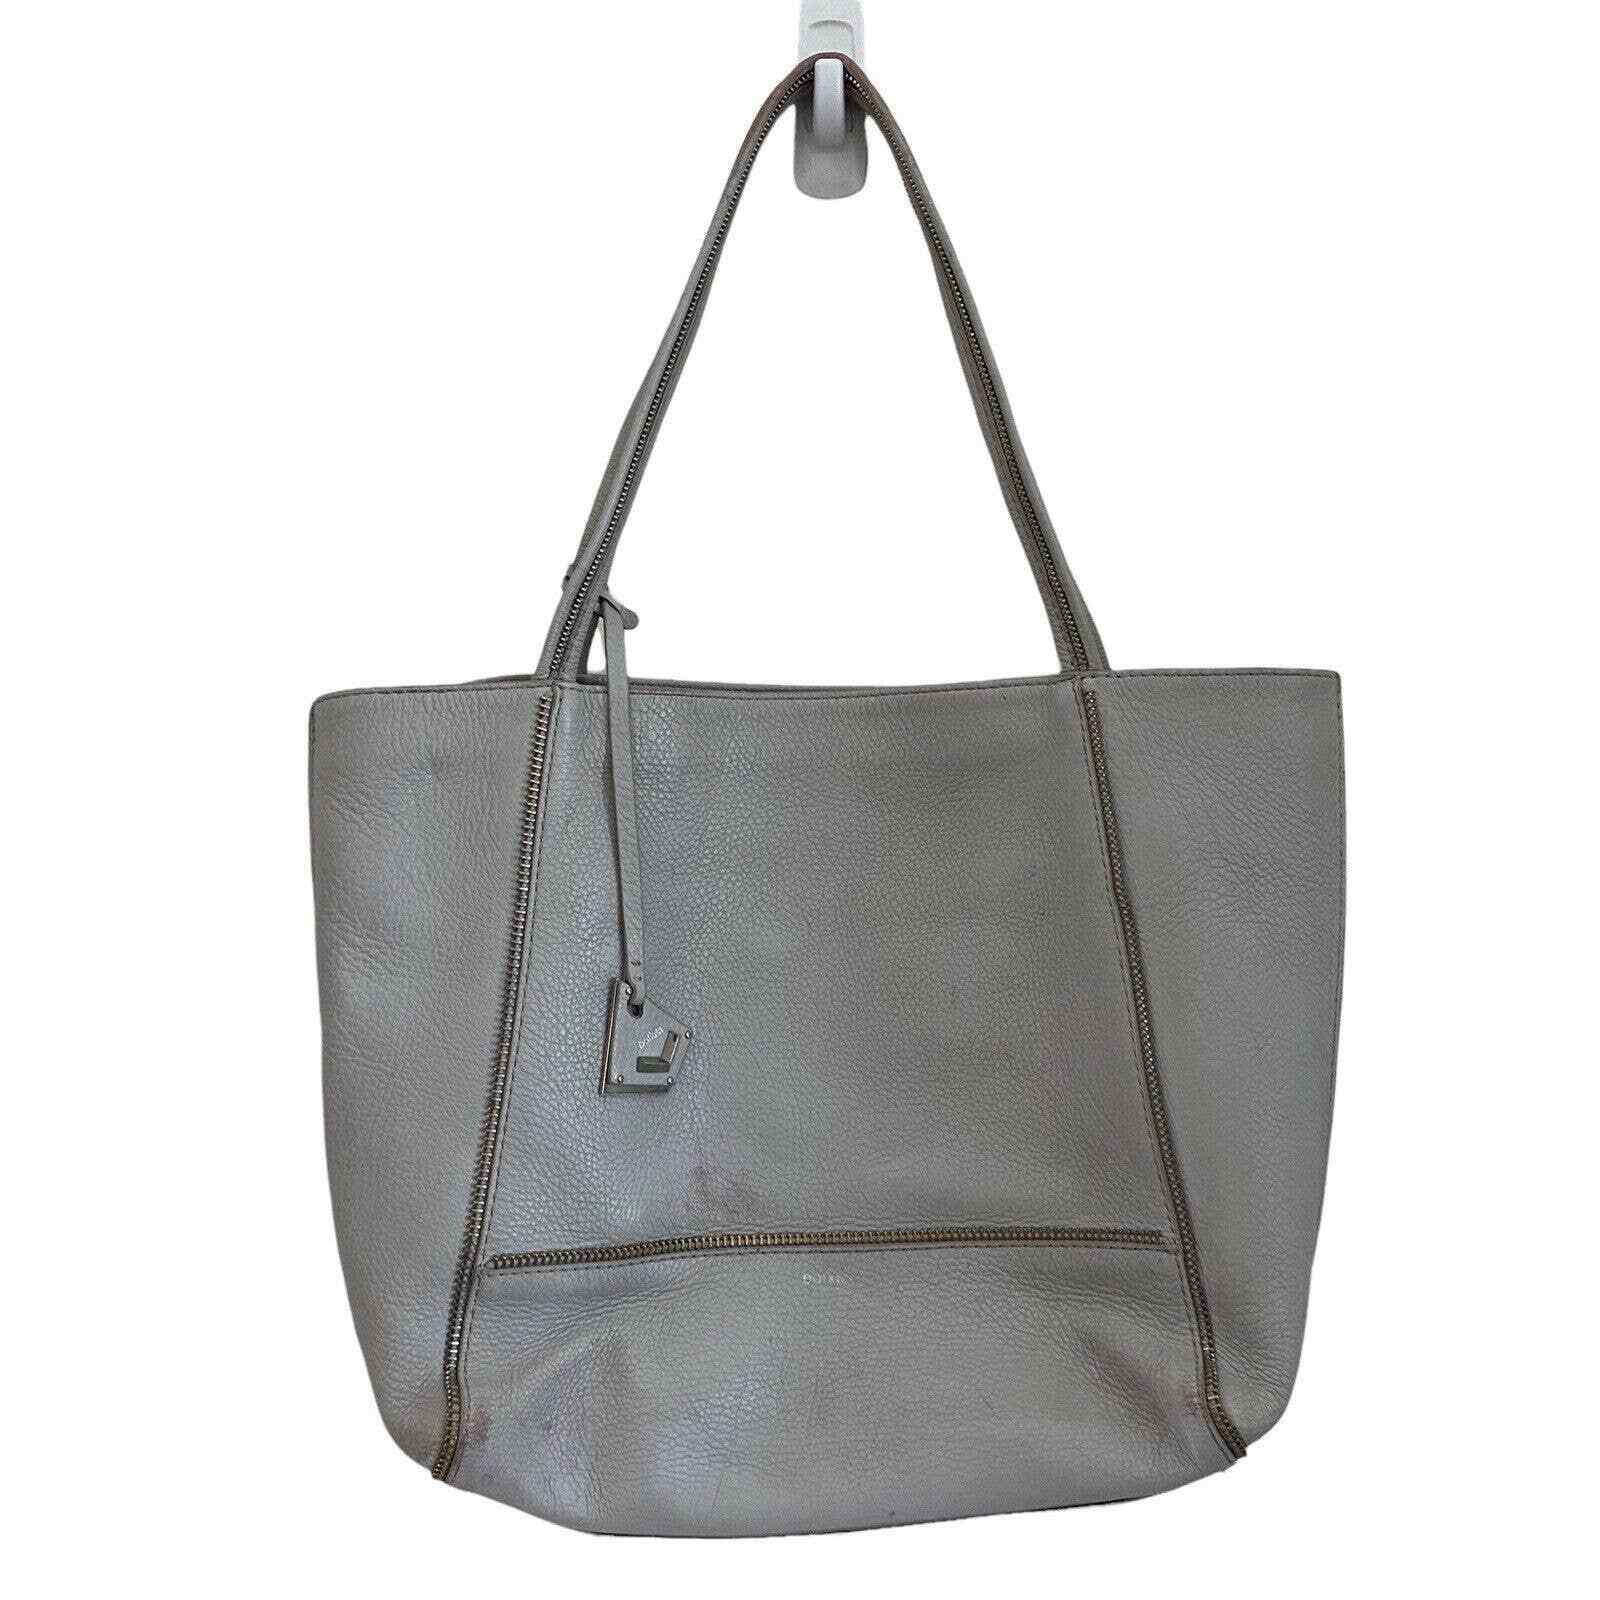 Botkier Womens Tote Bag Purse Light Gray Pebbled Leather Zipper Detail Large